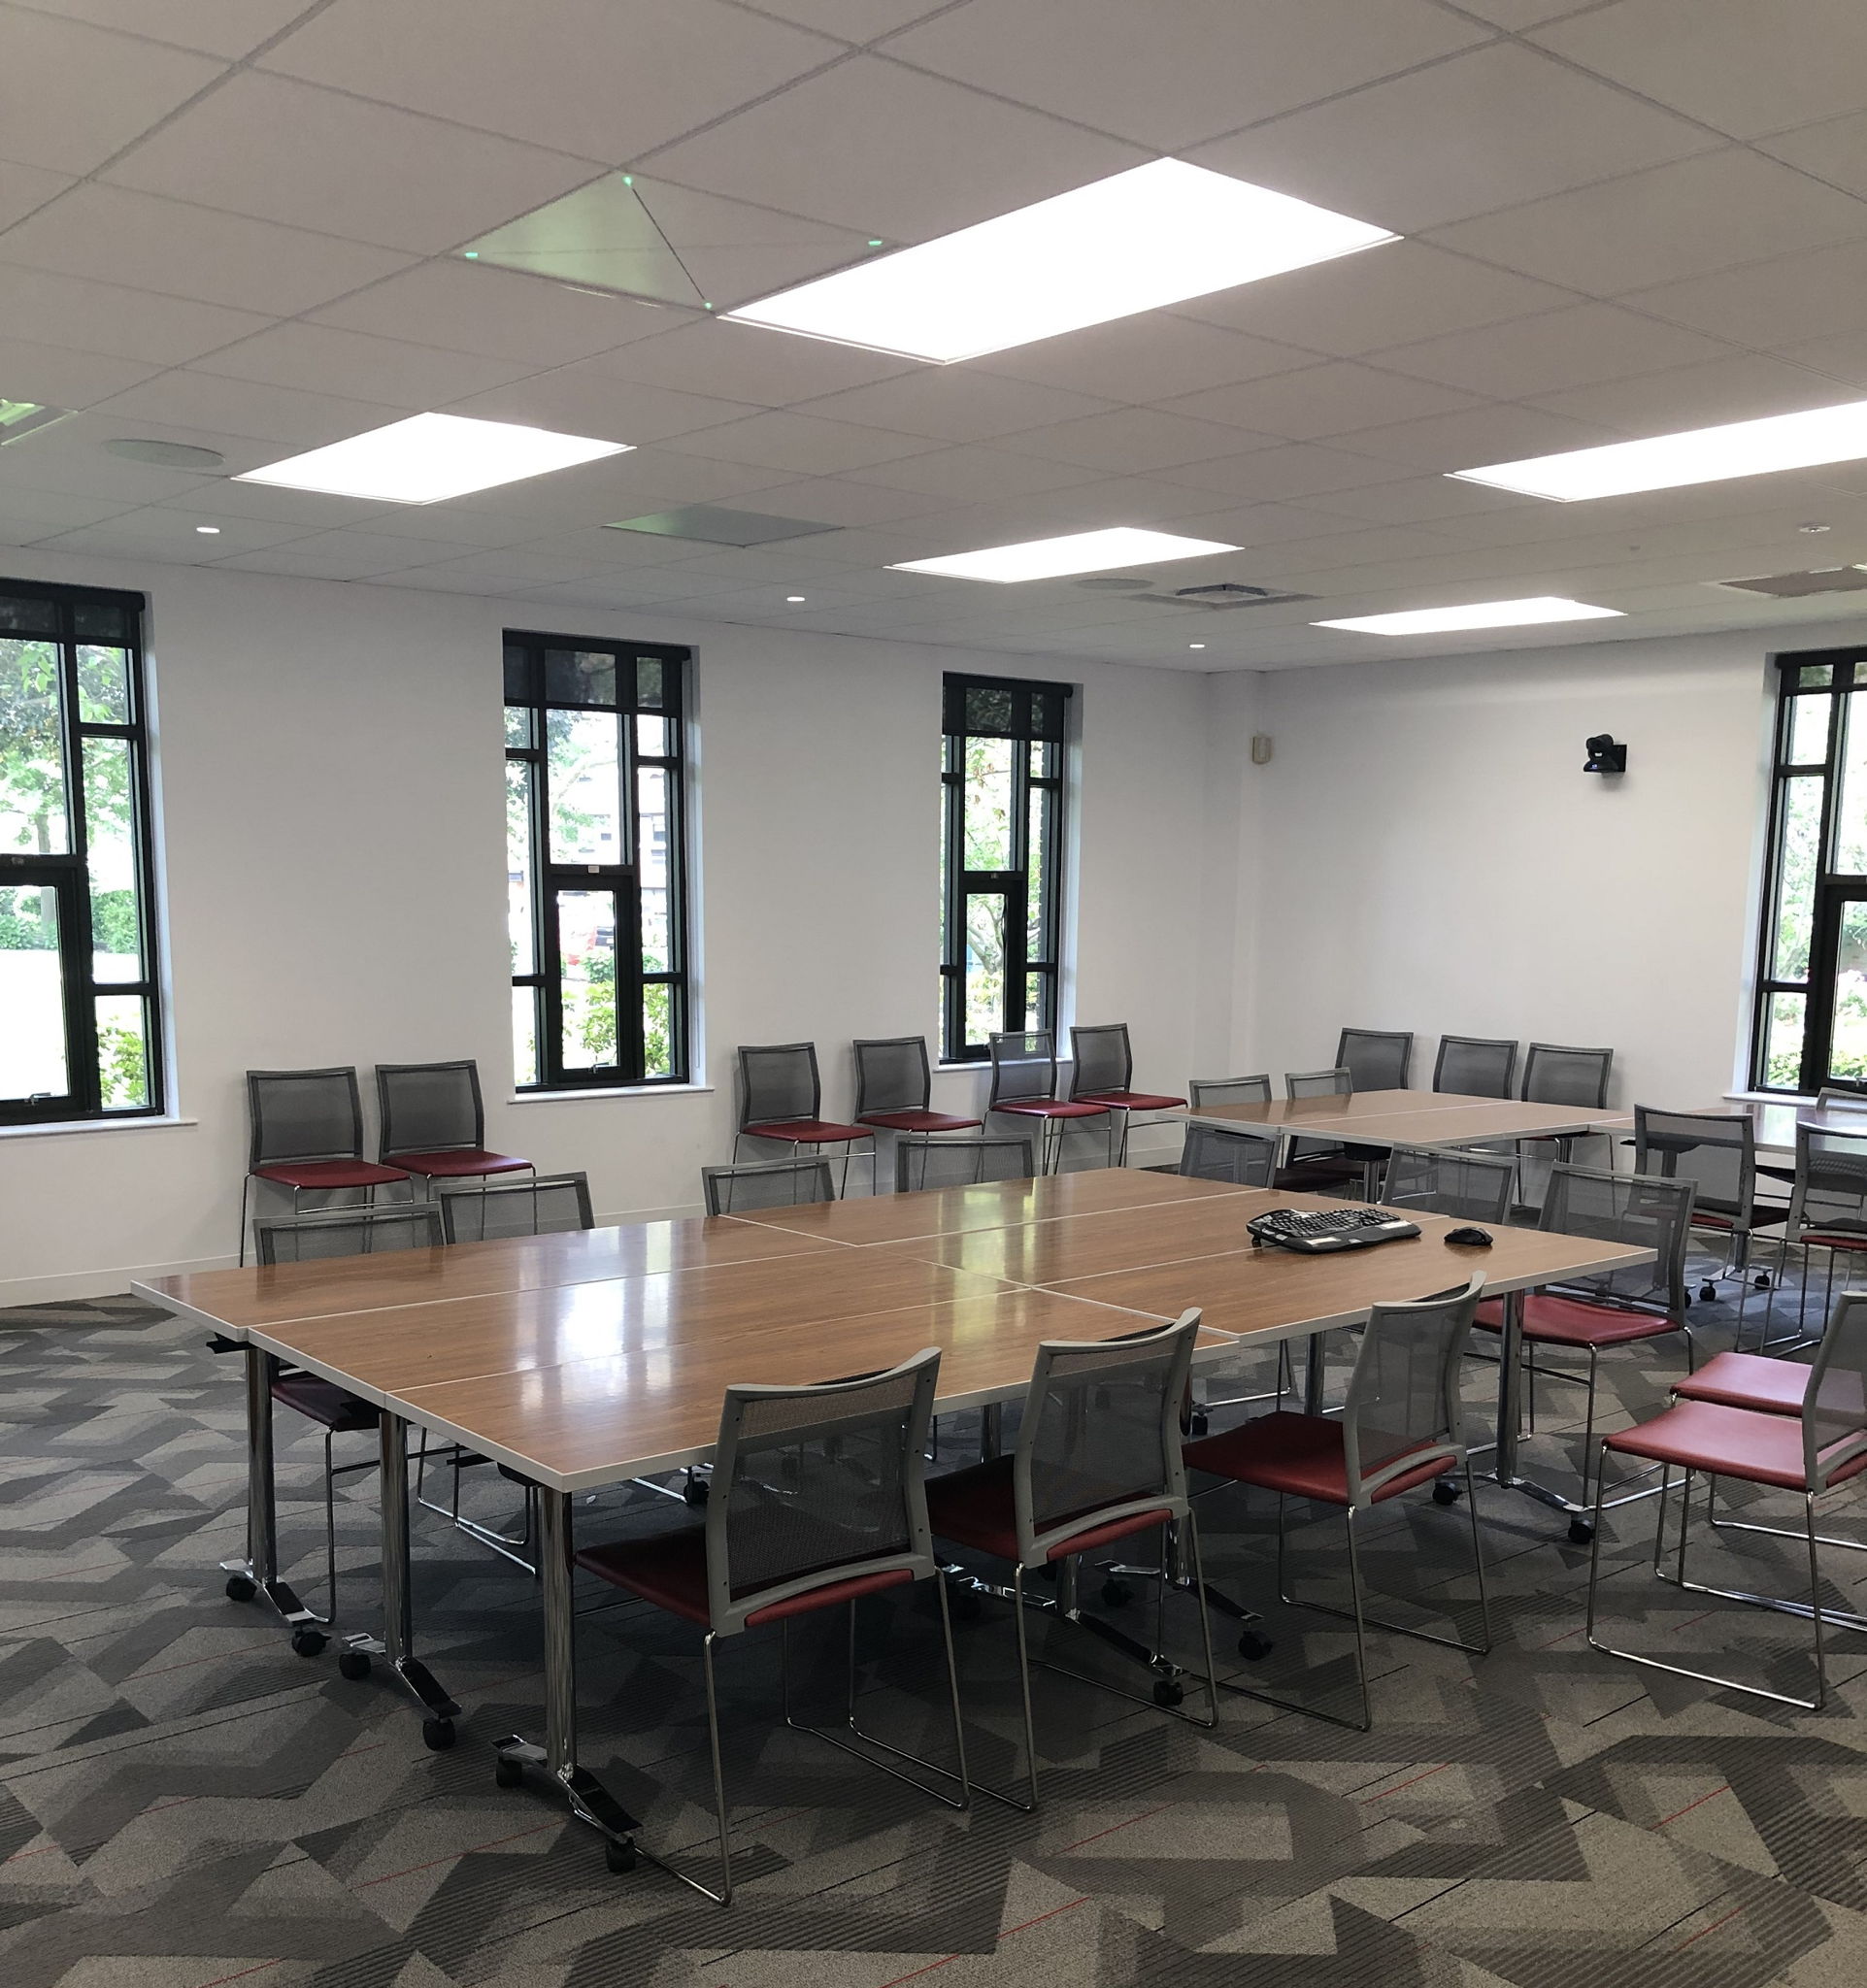 In St. John’s University’s Inclusivity Resource Center, a Sennheiser TeamConnect Ceiling provides intelligible audio for a wide range of communication needs.
(Image courtesy of St. John’s University)